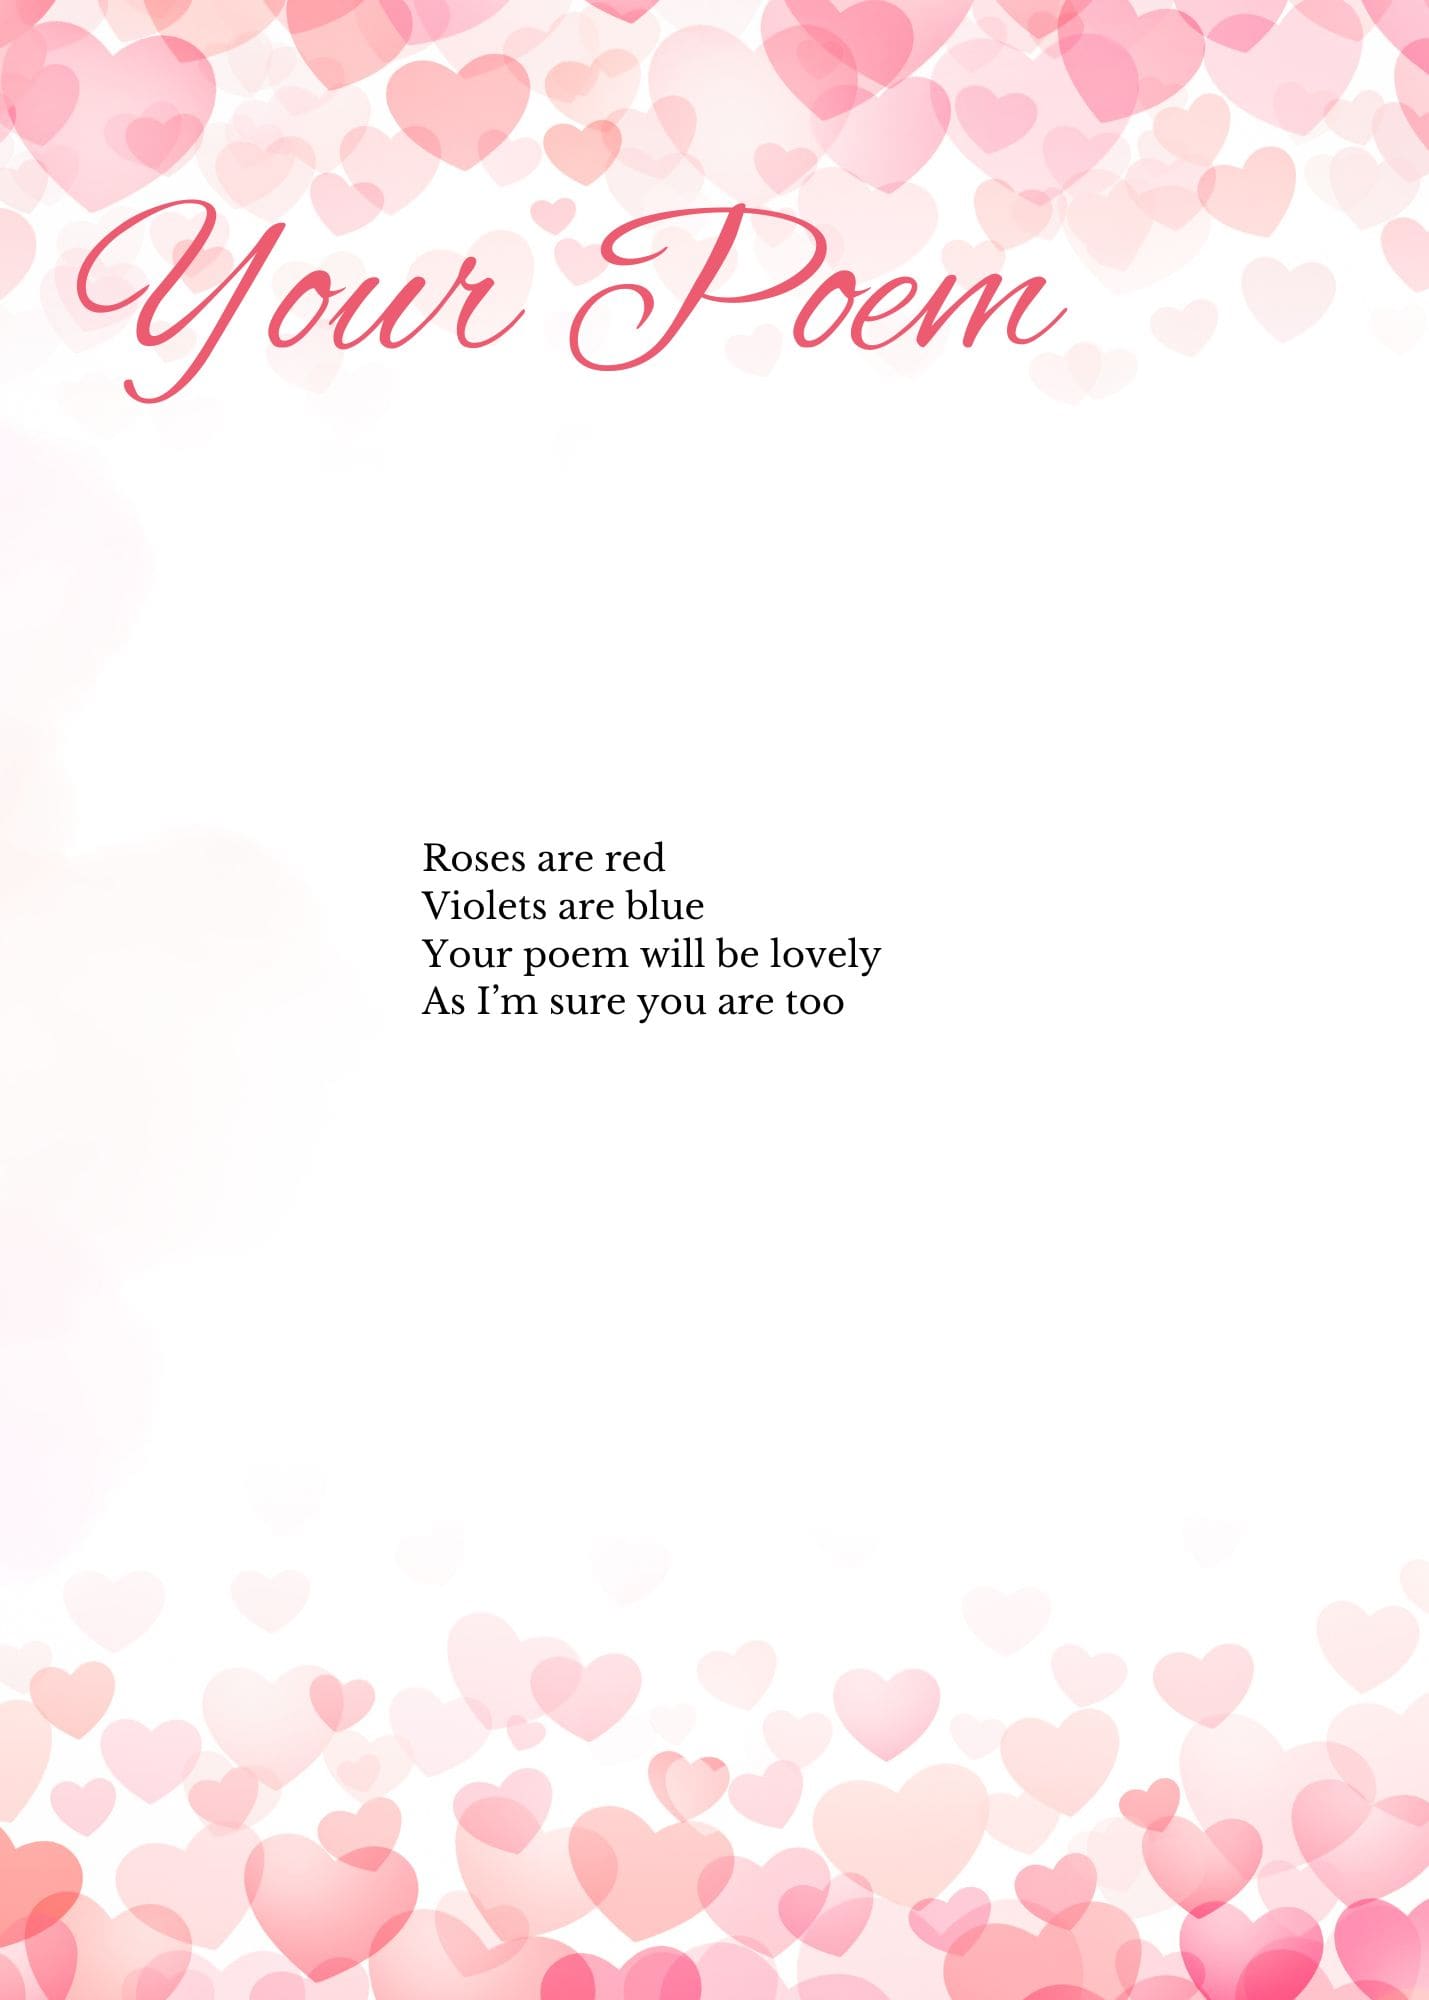 Pink hearts on a white background framing a poem